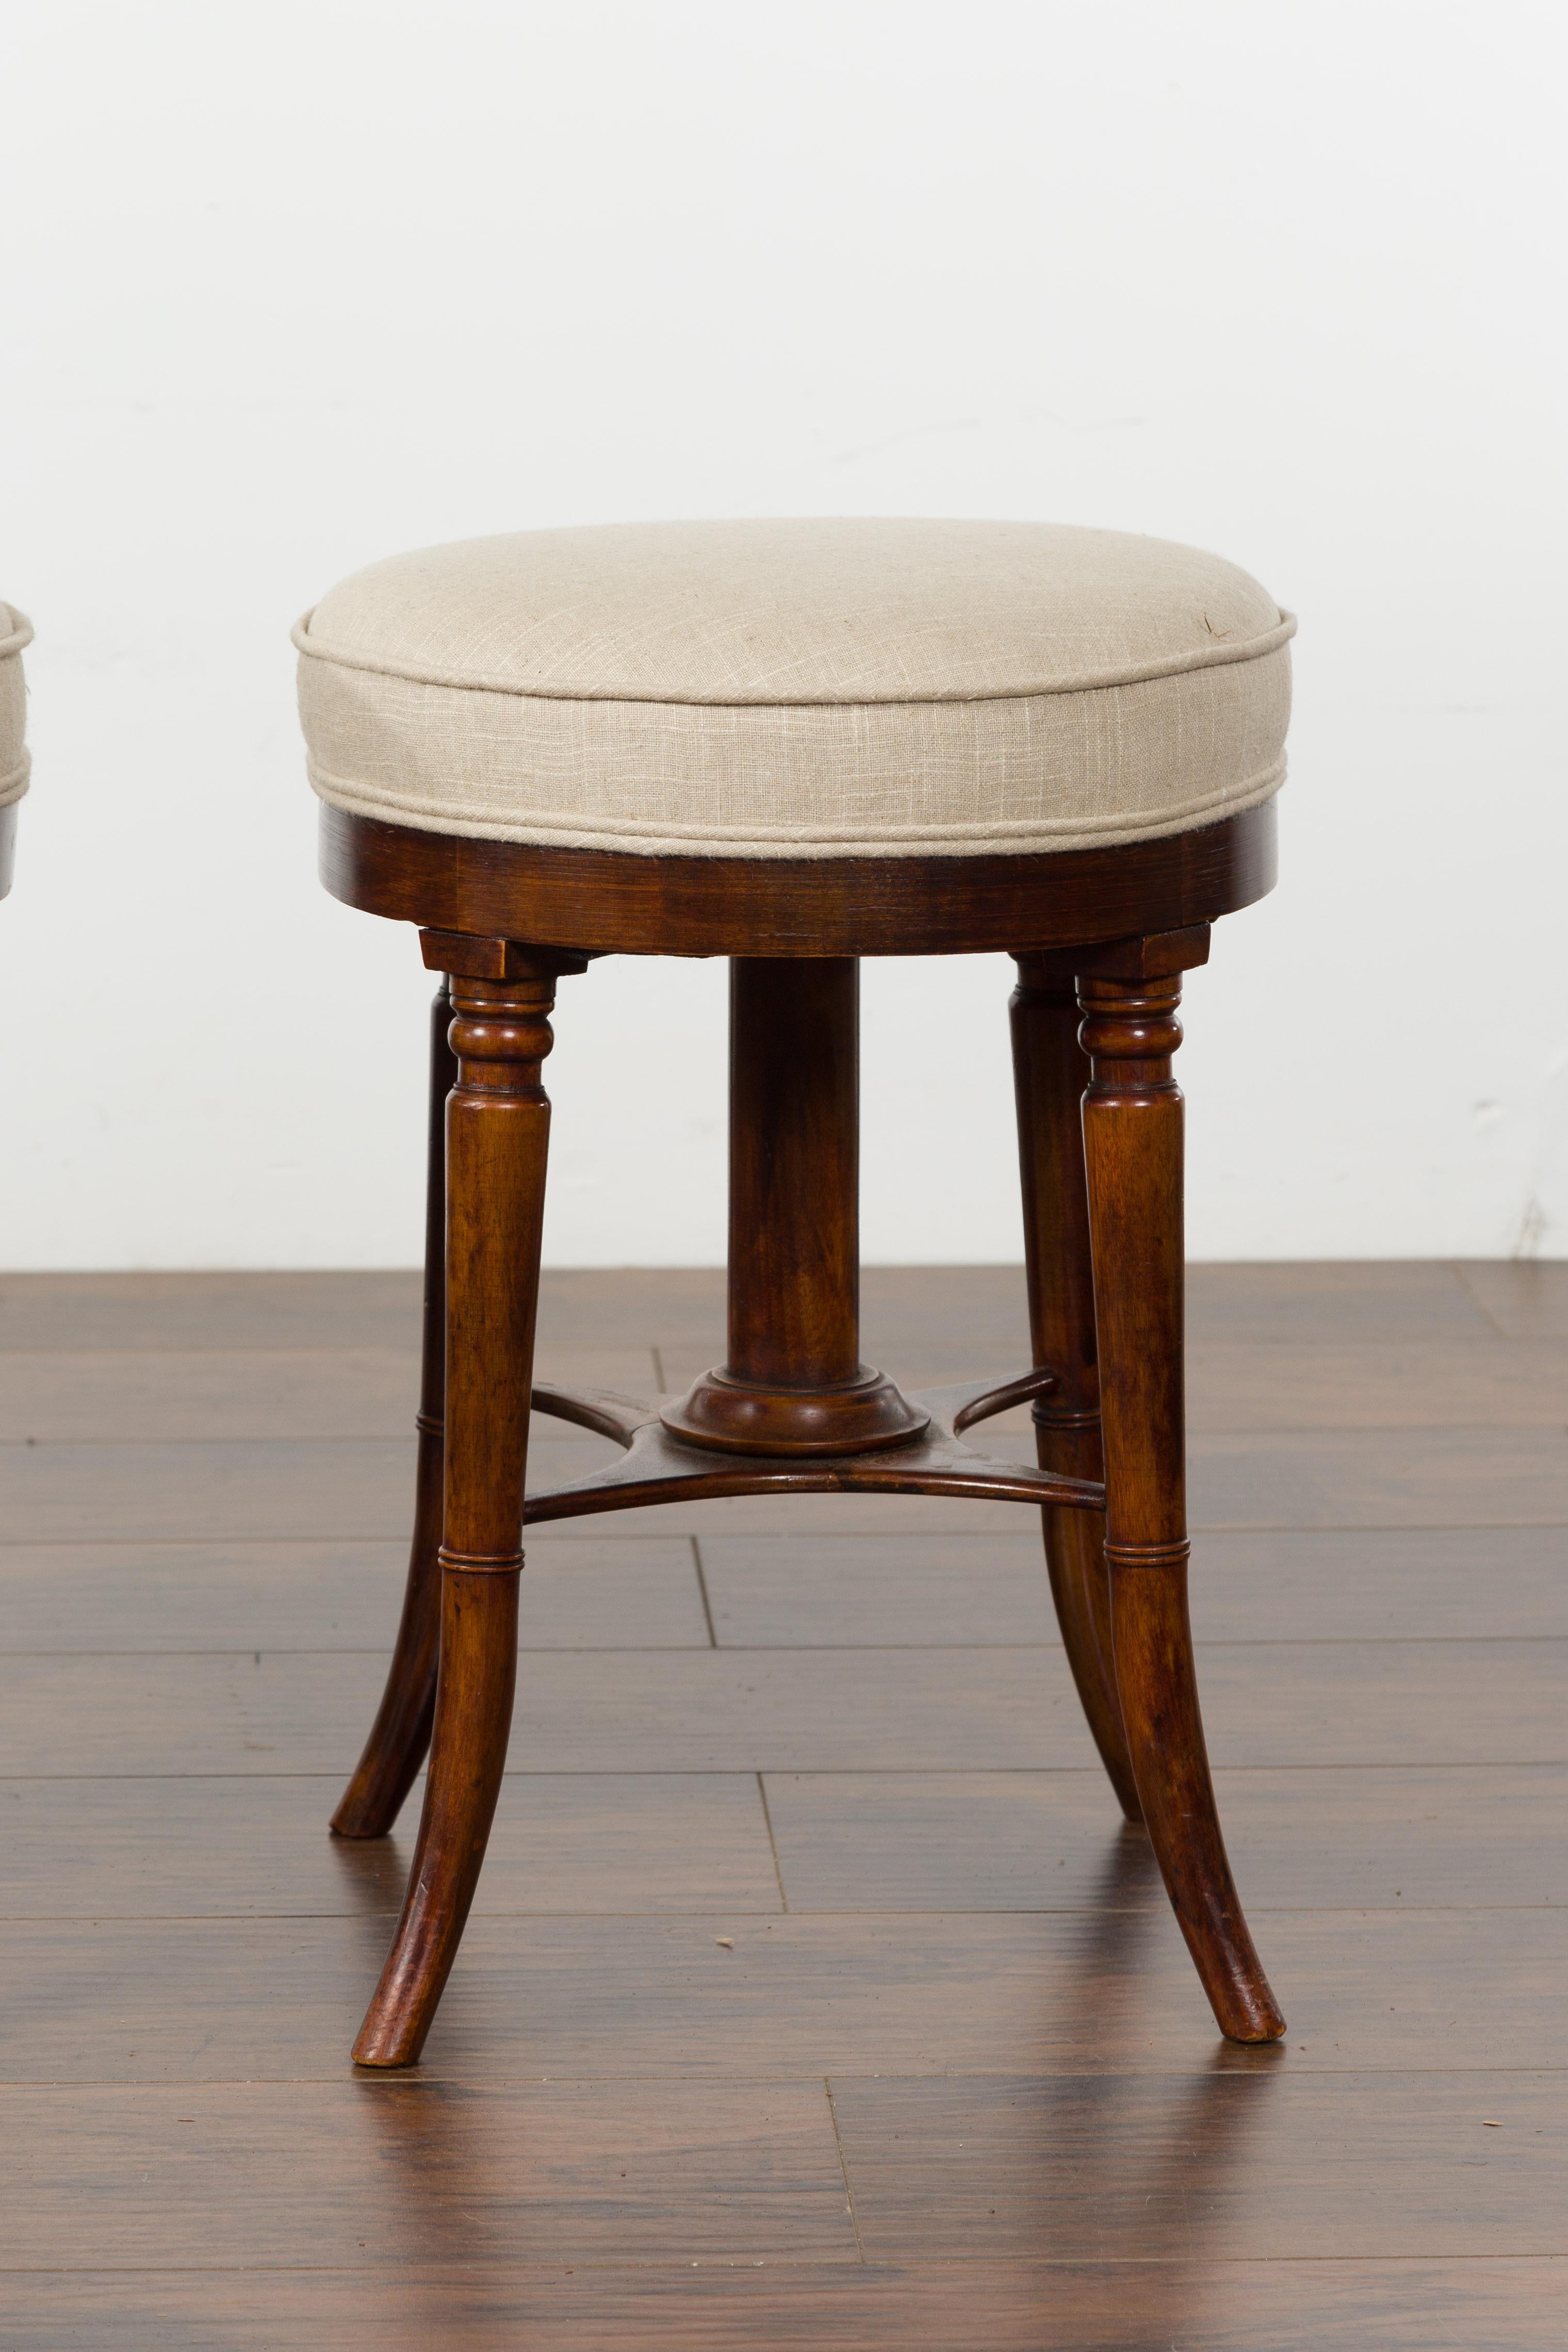 Pair of English 1920s Mahogany Stools with Turned Legs and New Upholstery In Good Condition For Sale In Atlanta, GA